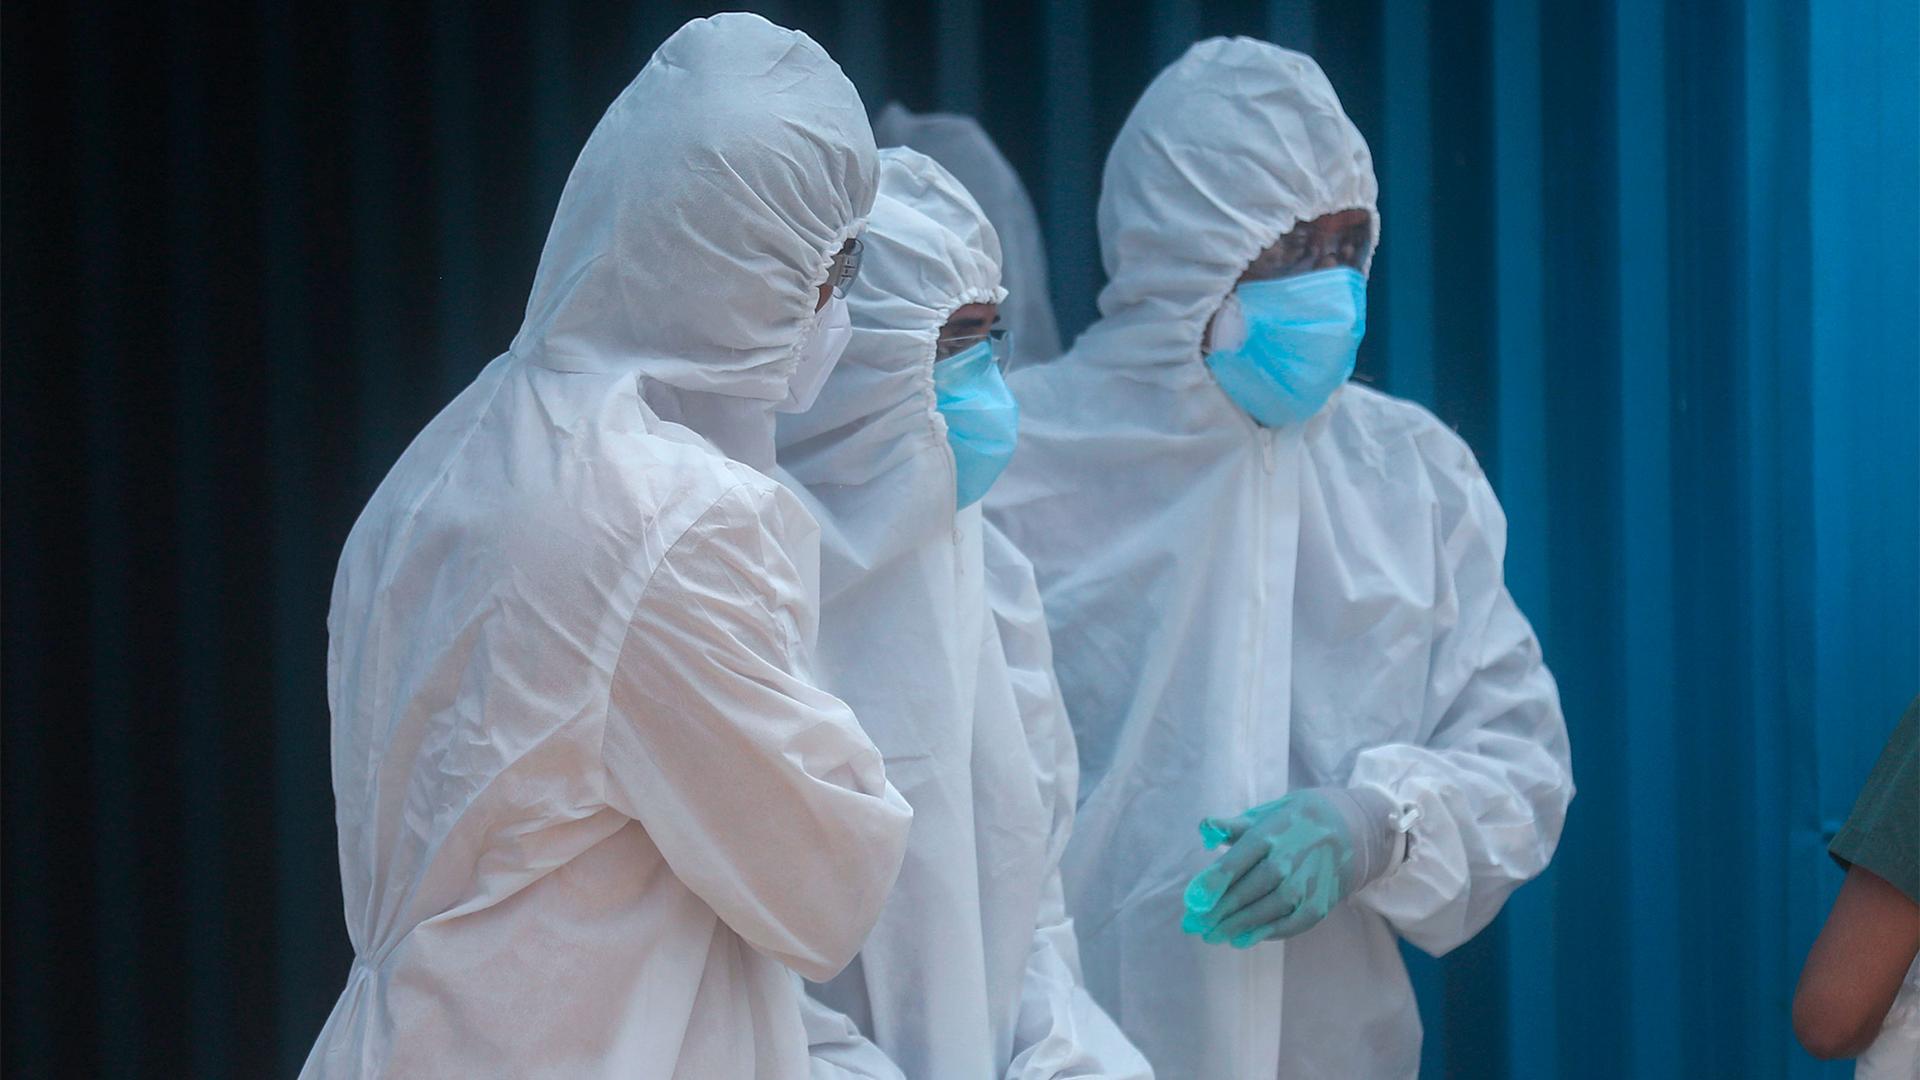 Three people wearing white biohazard suits look on to a dead relative out of frame